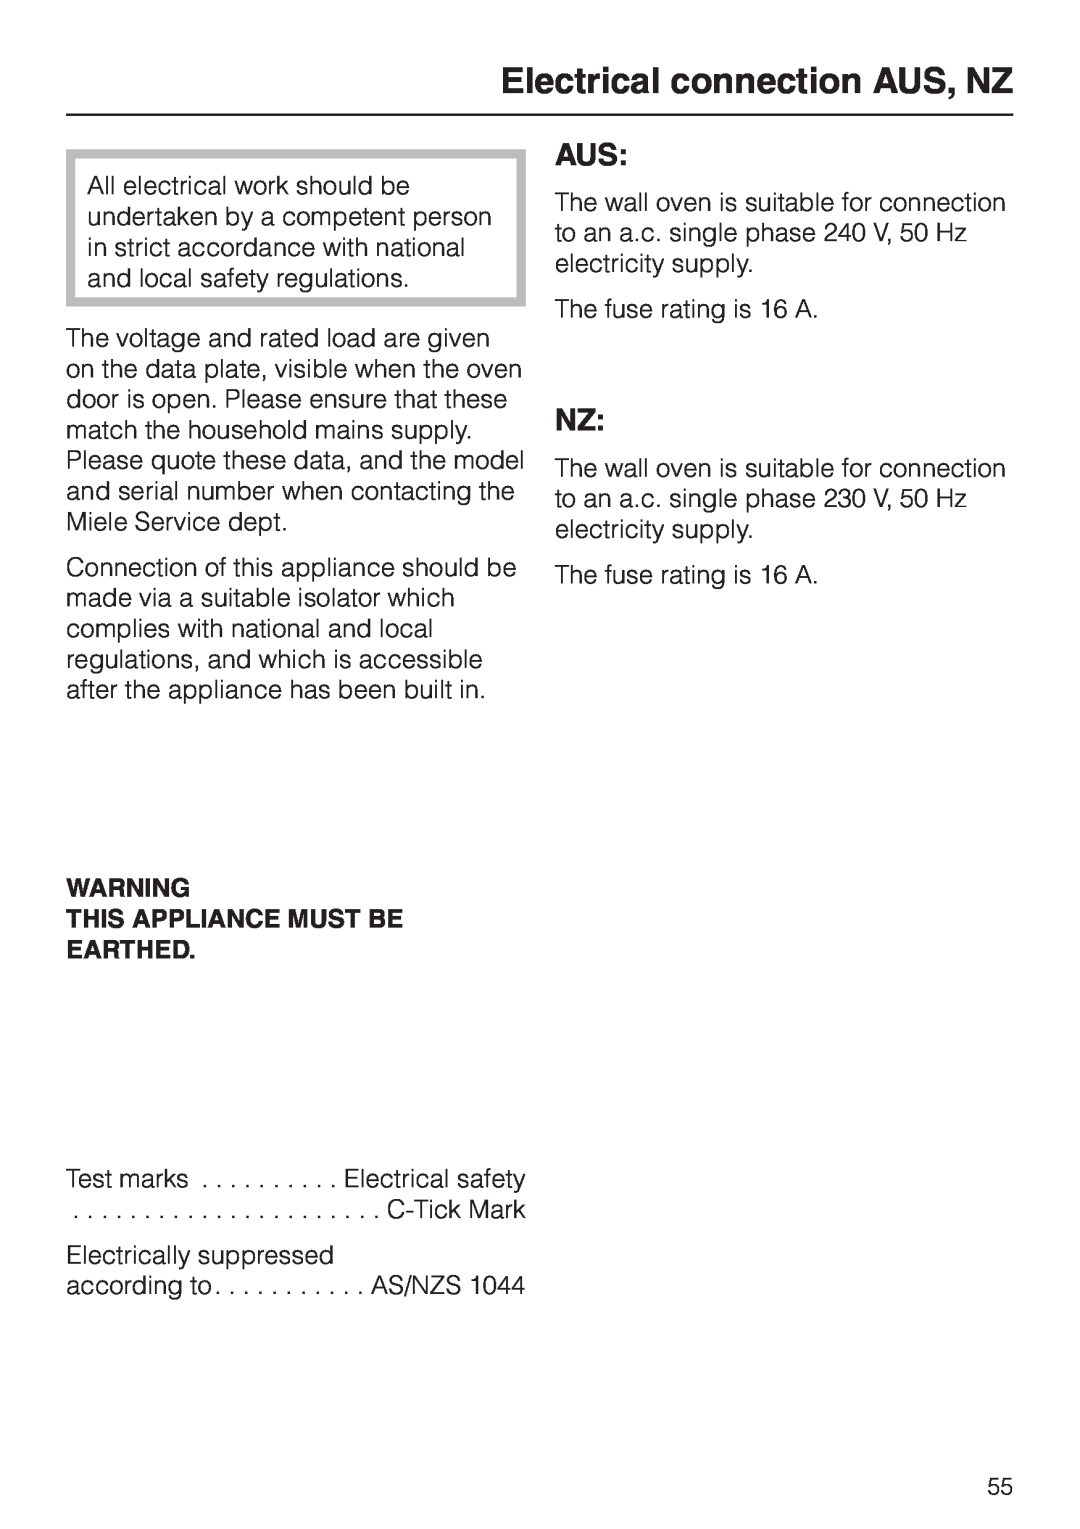 Miele H 4681 installation instructions Electrical connection AUS, NZ, This Appliance Must Be Earthed 